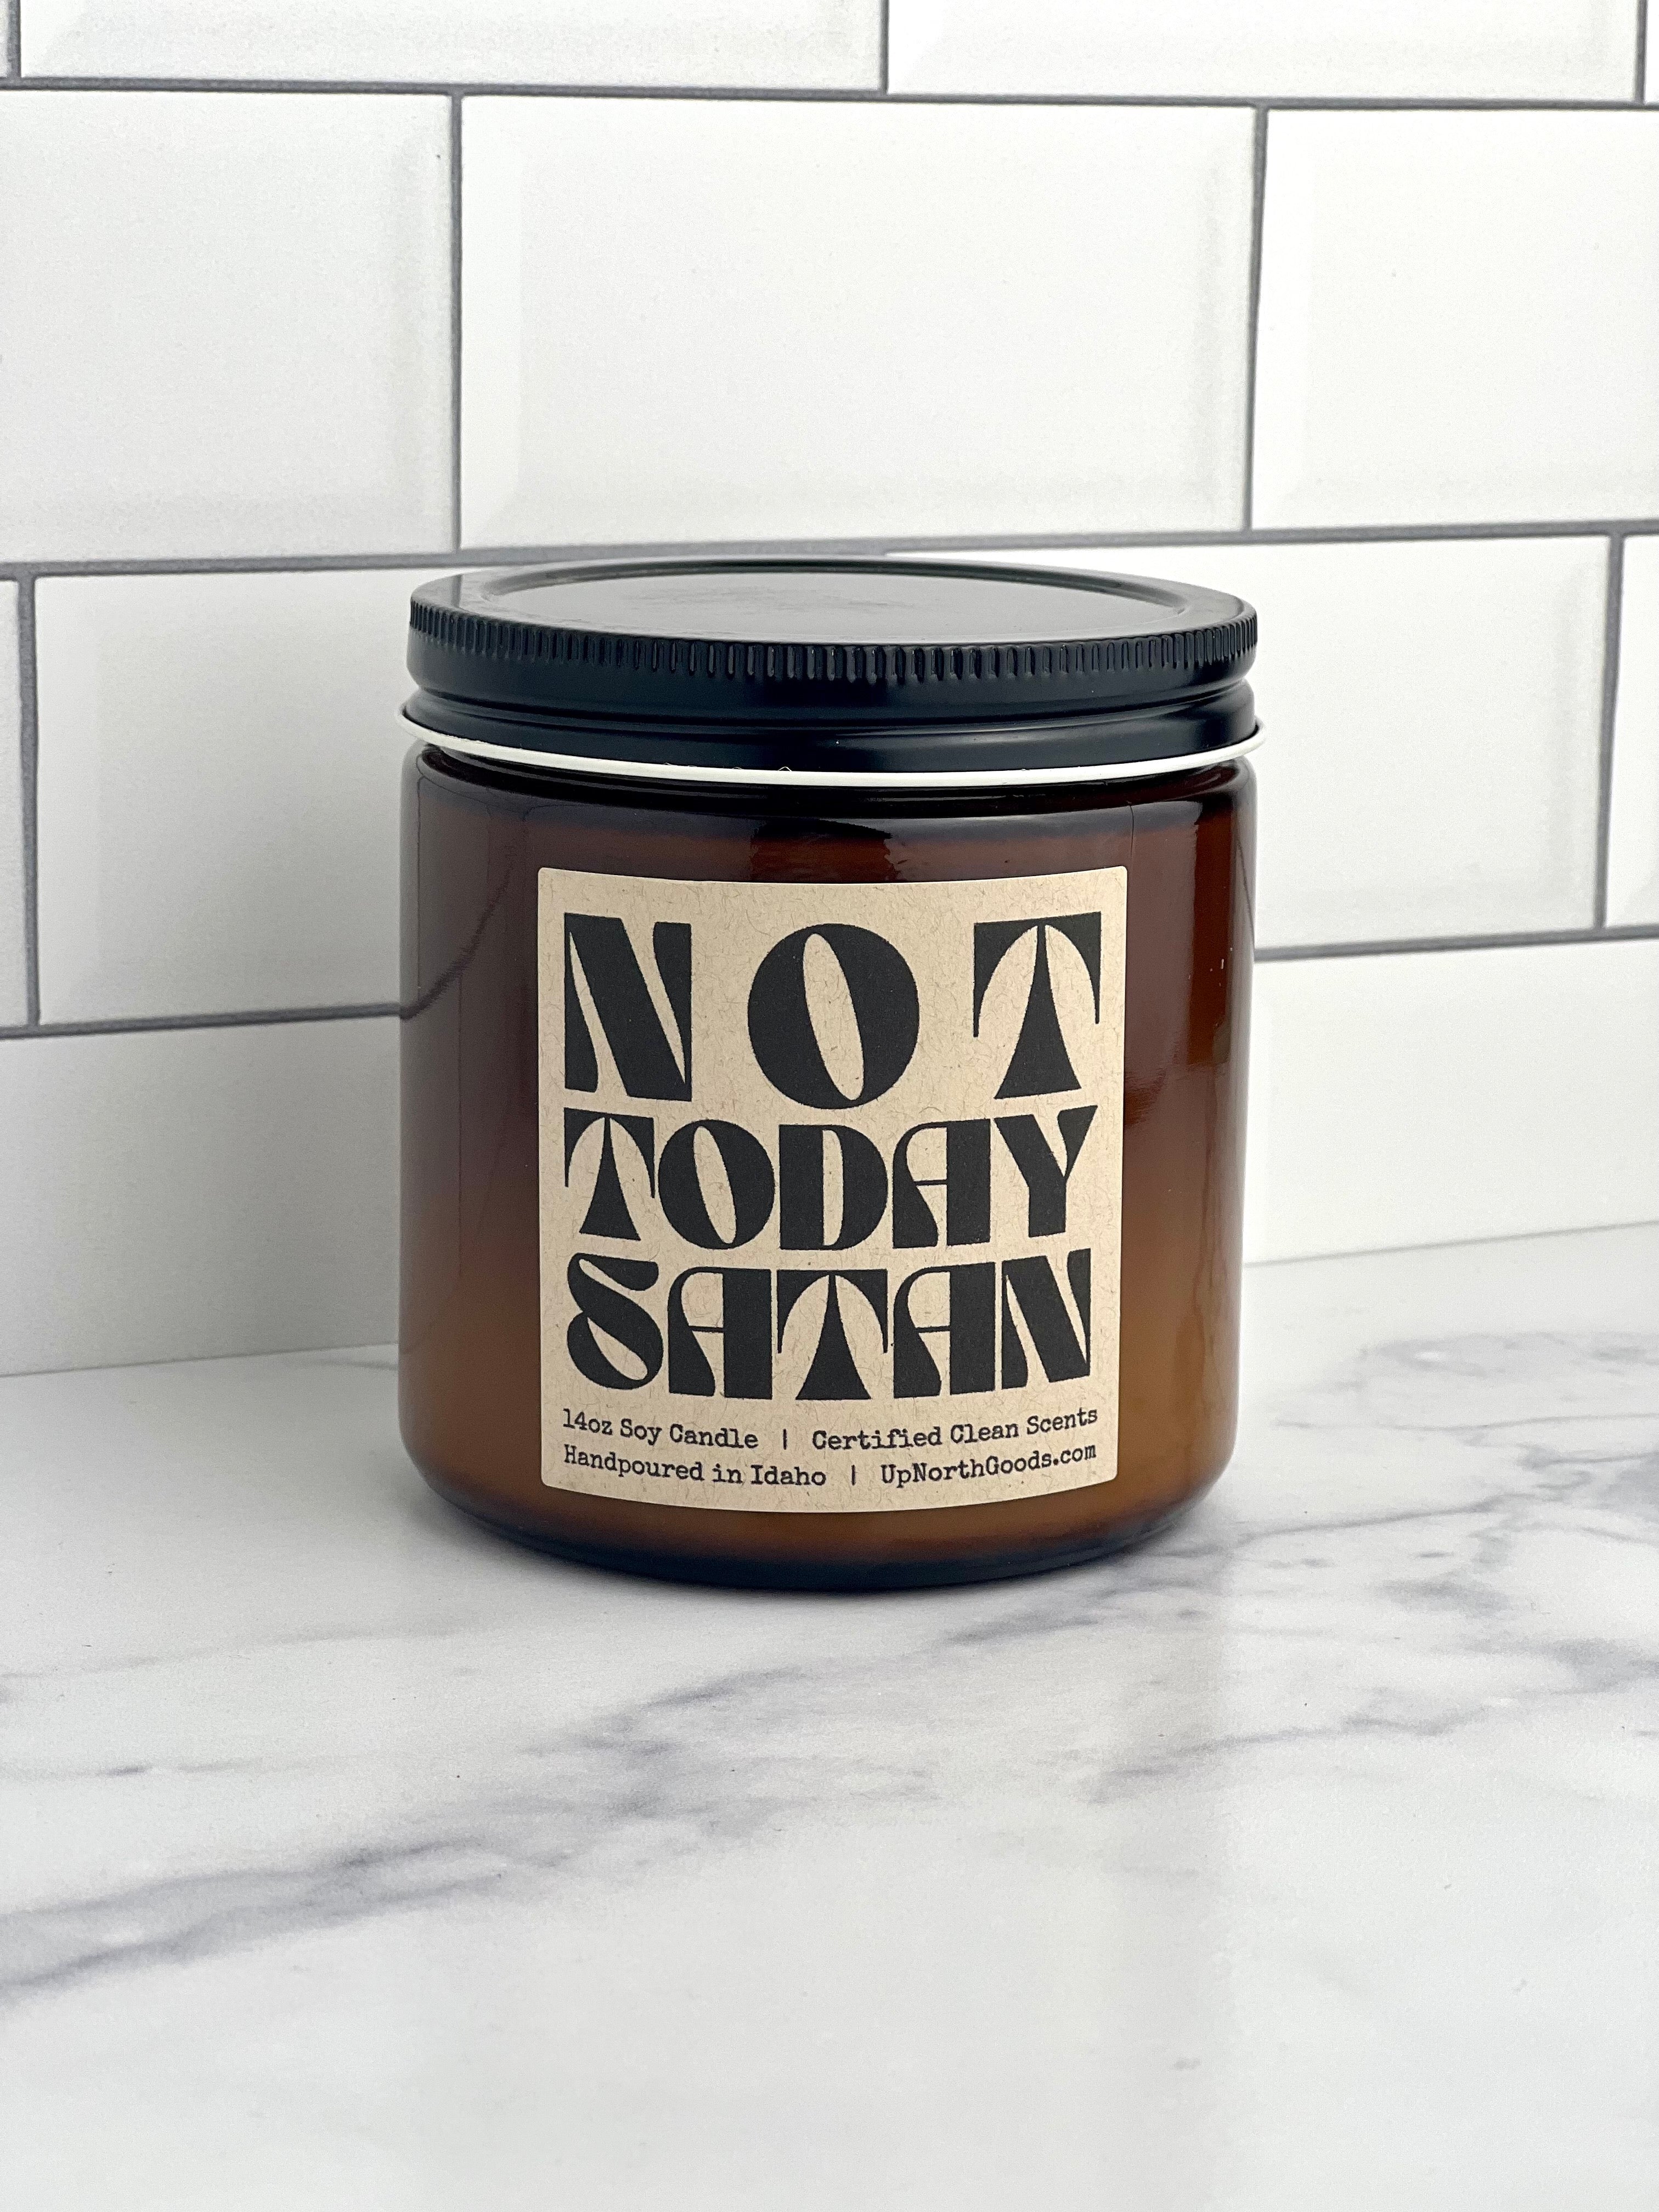 Not Today Satan Soy Candle